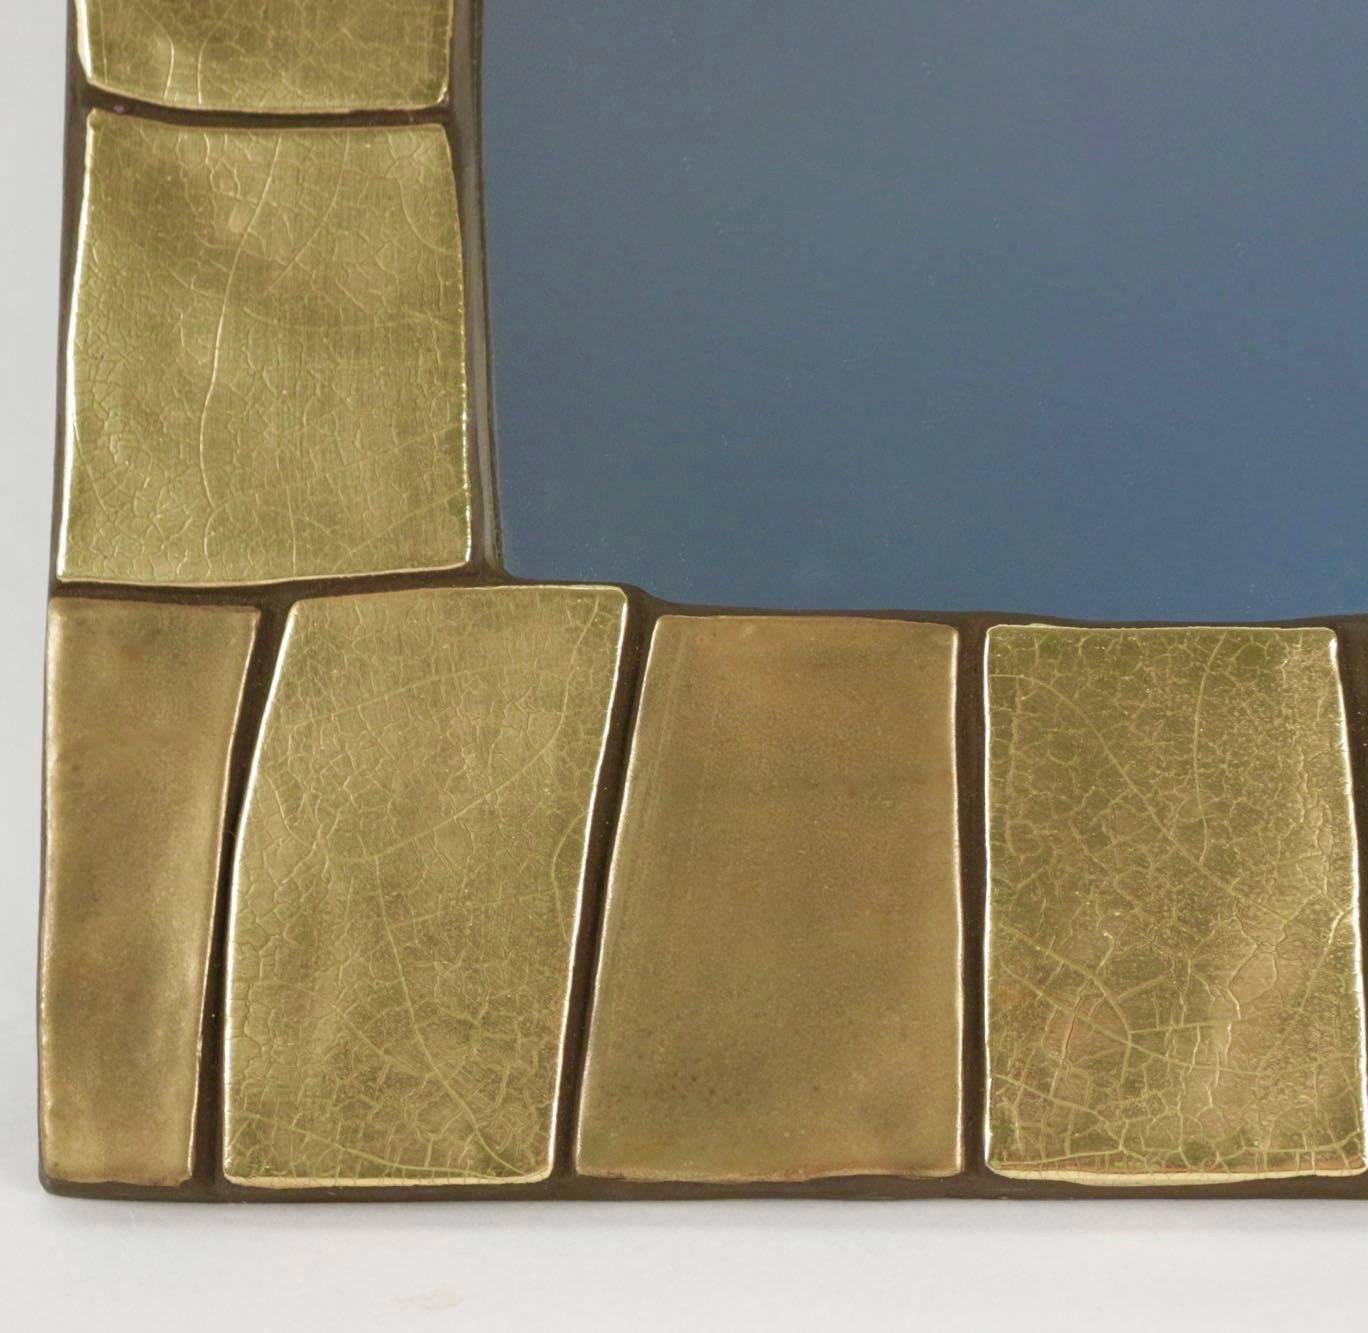 1960s gilded and enameled ceramic mirror, by Mithé Espelt 

The frame is composed by gilded and enameled ceramic tiles of different shades and textures.